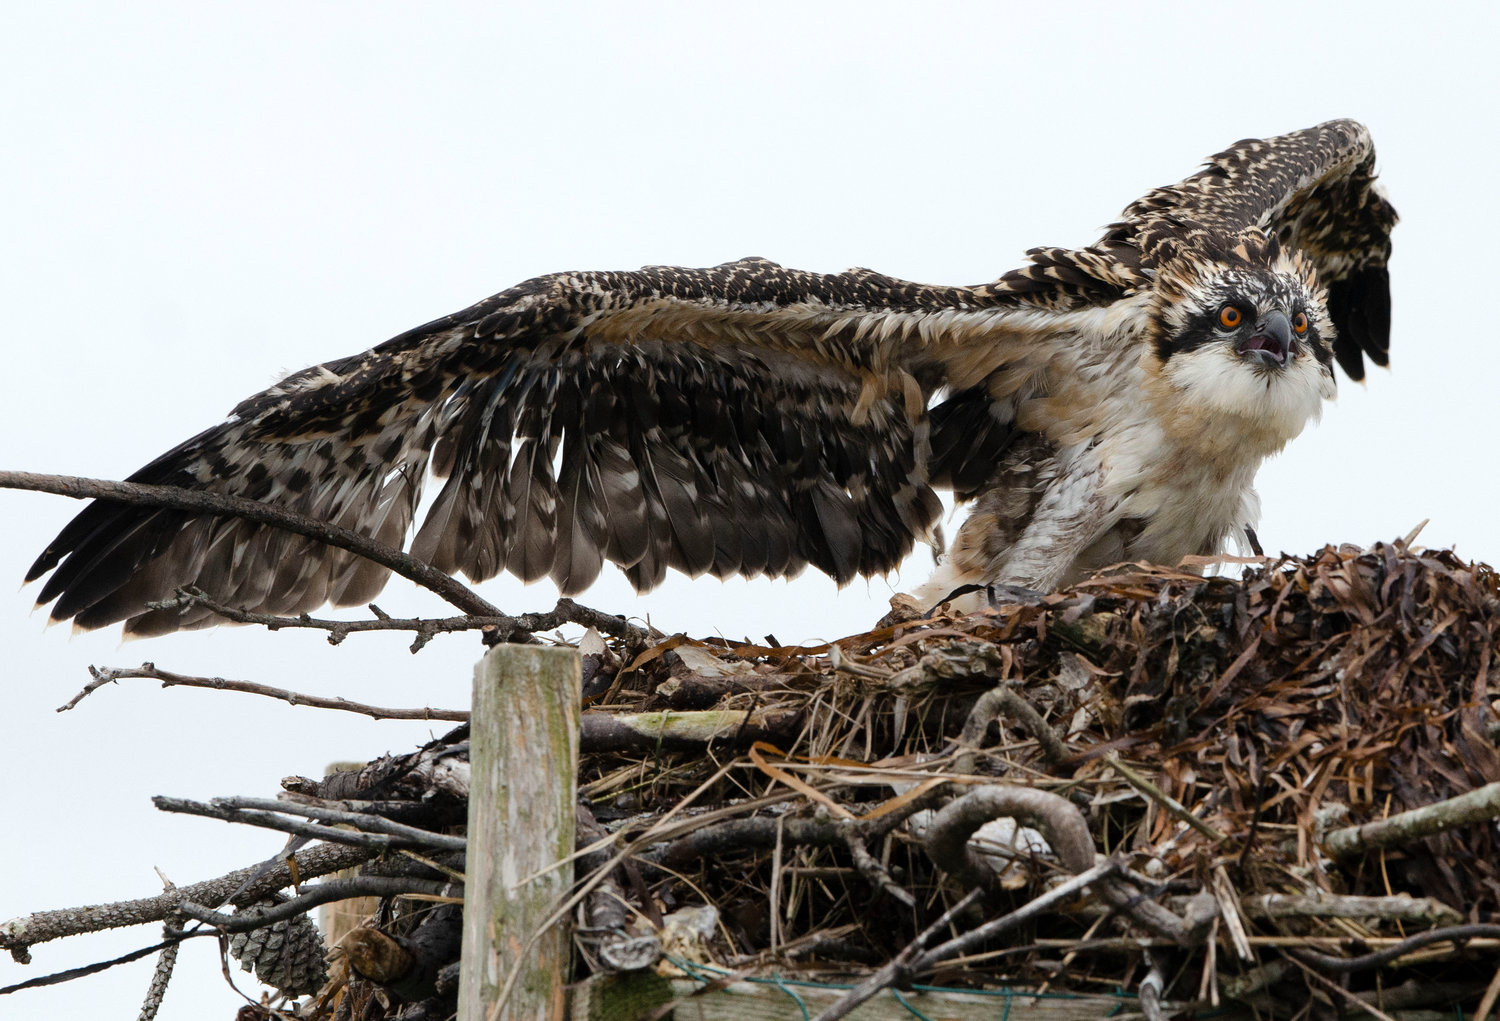 An osprey fledgling is startled as Dr. Alan Poole pops his head up over the nest.